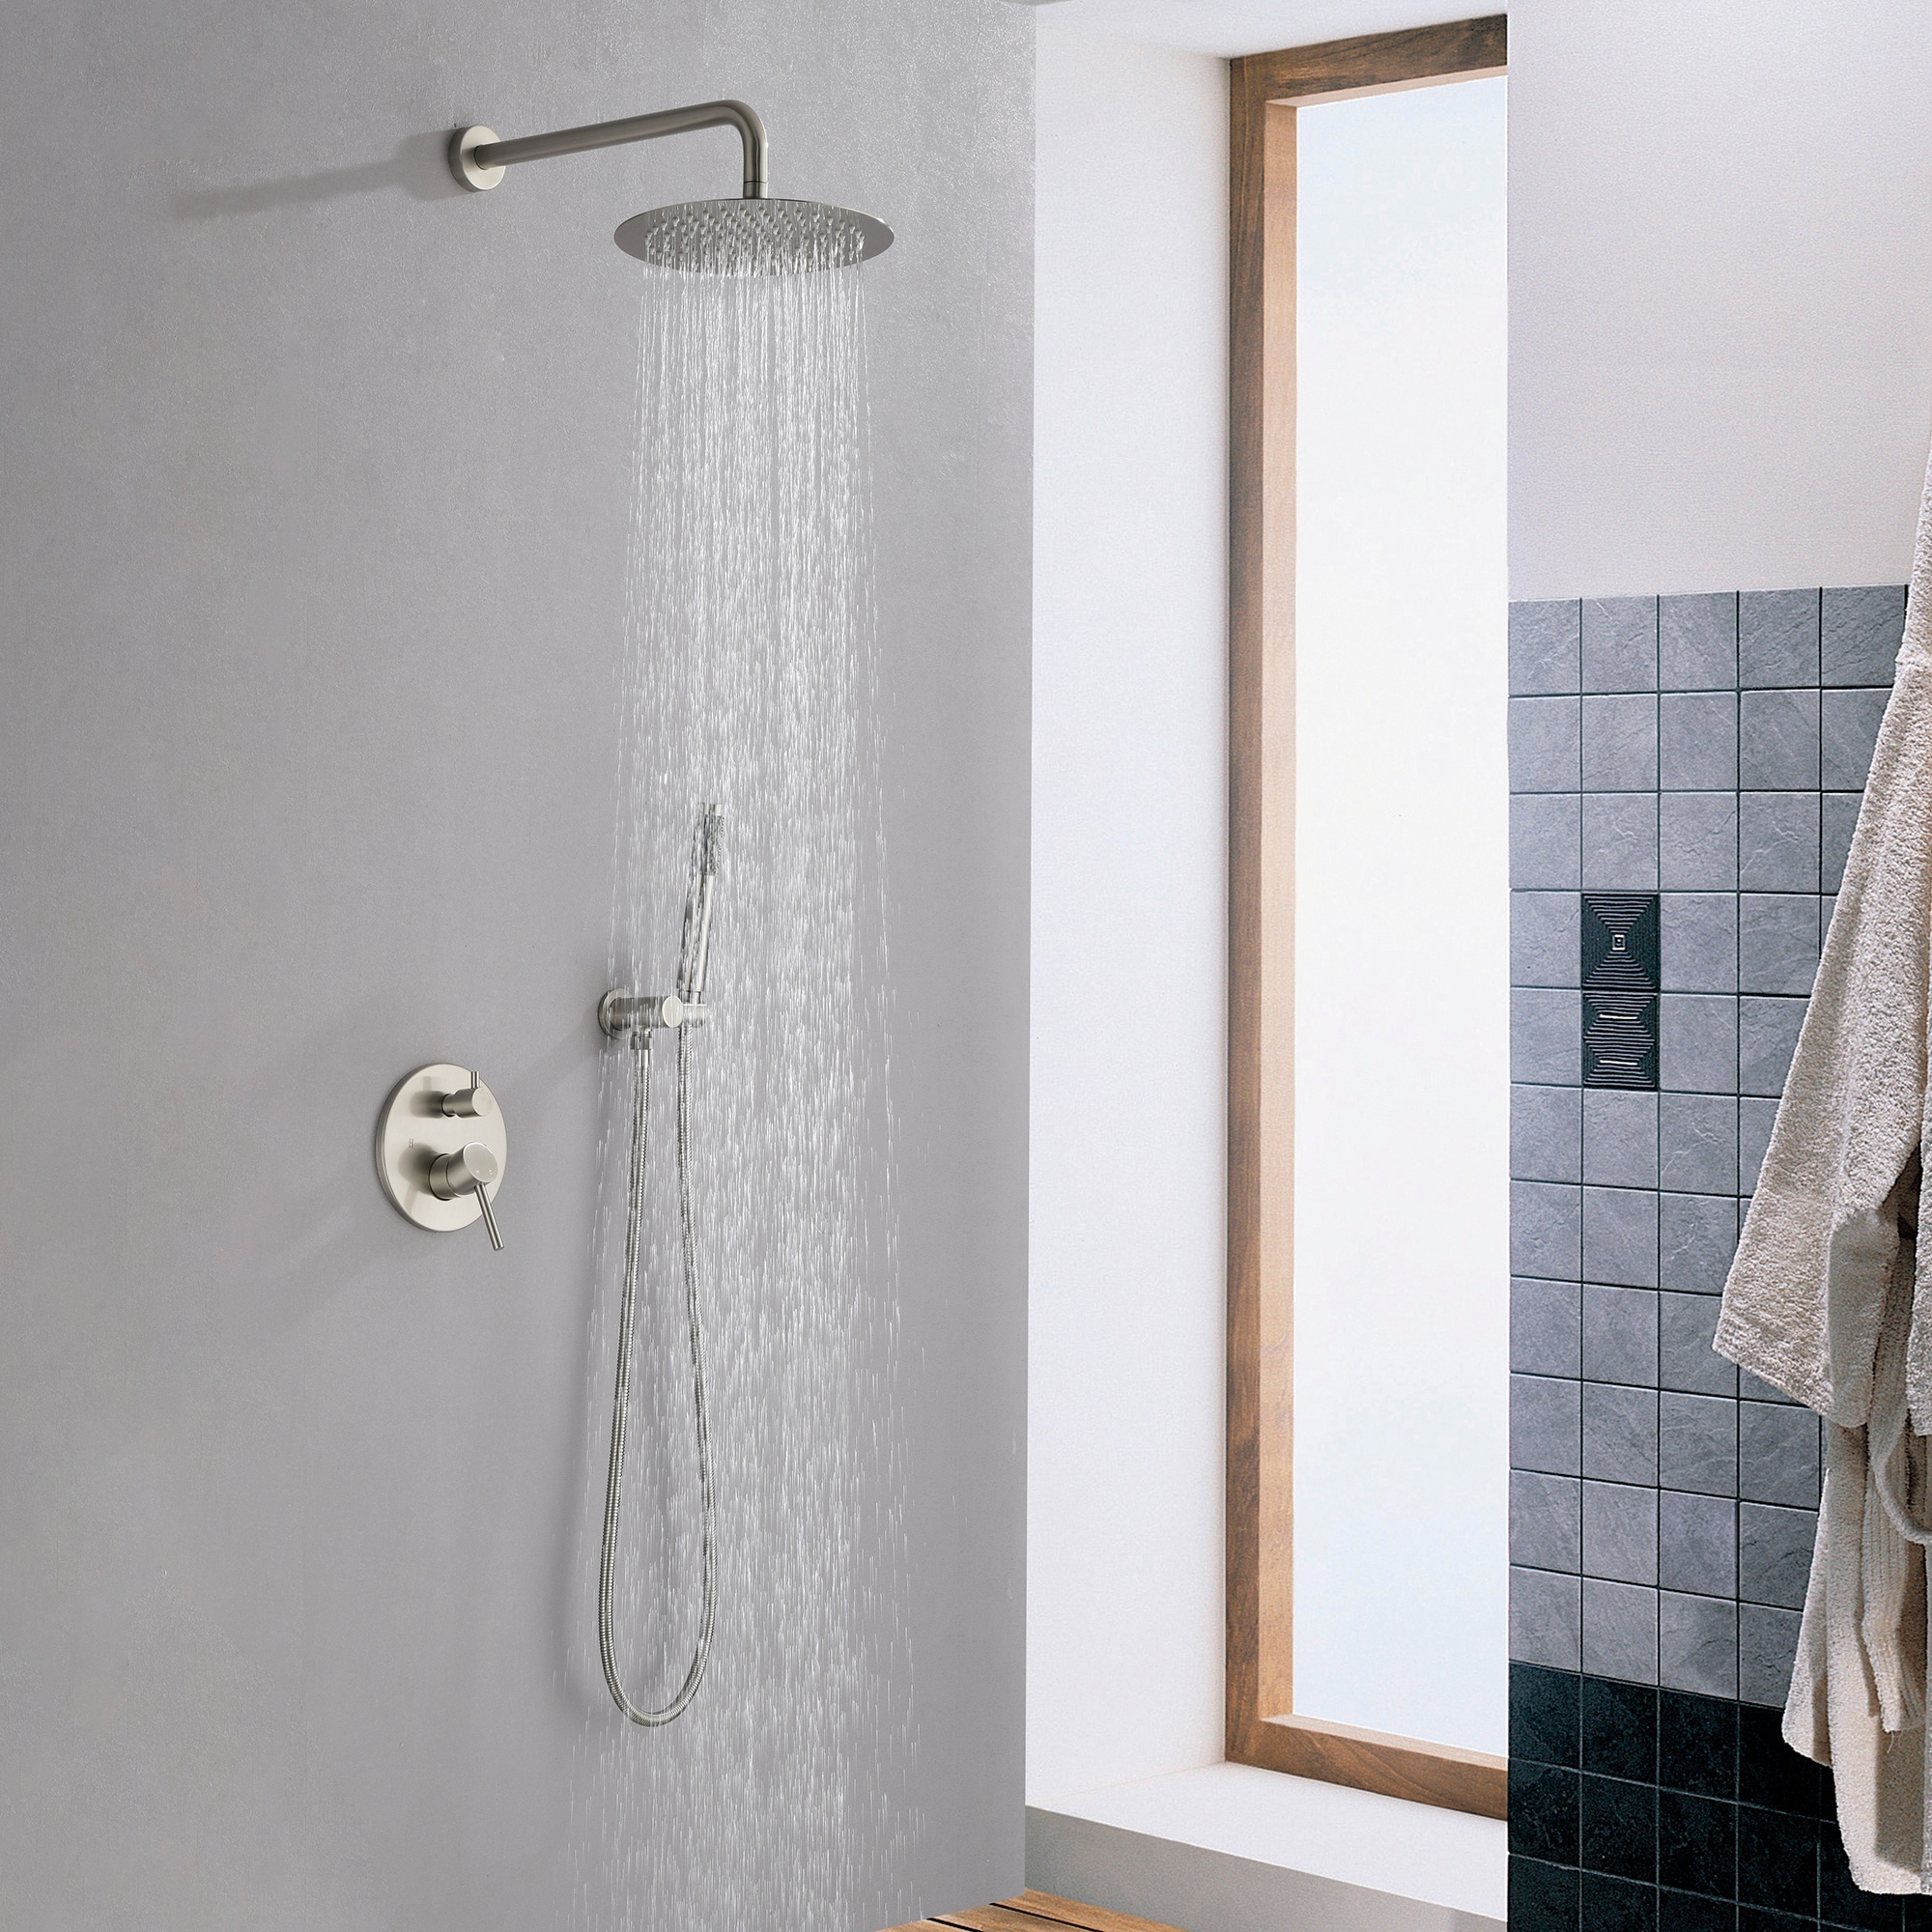 EPOWP Brushed Nickel Bathroom Shower System with Rough-In Valve